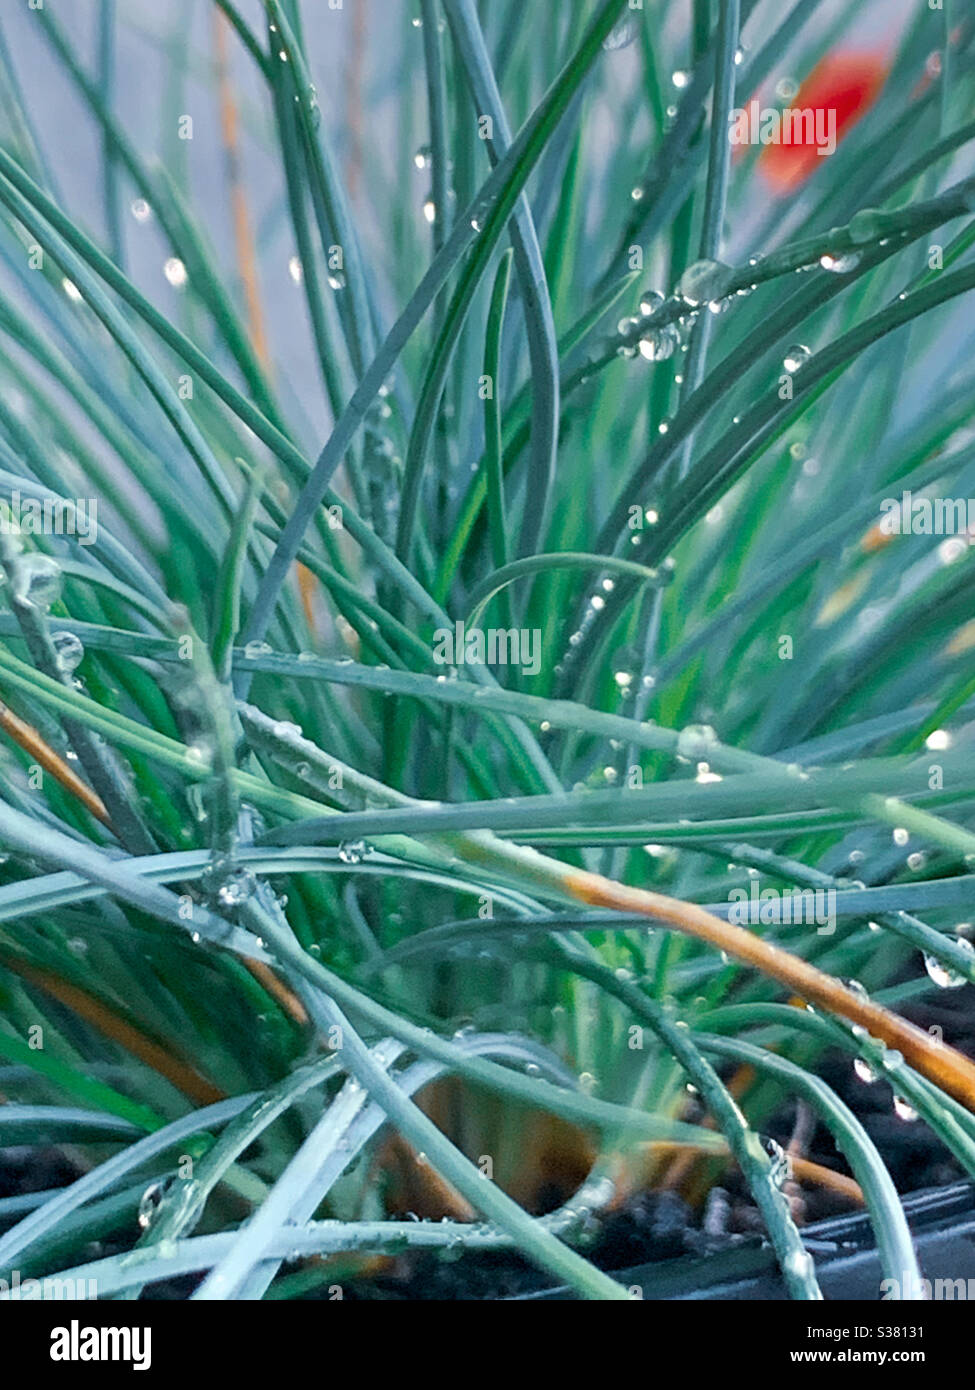 Elijah Blue Fescue grass covered in water droplets Stock Photo